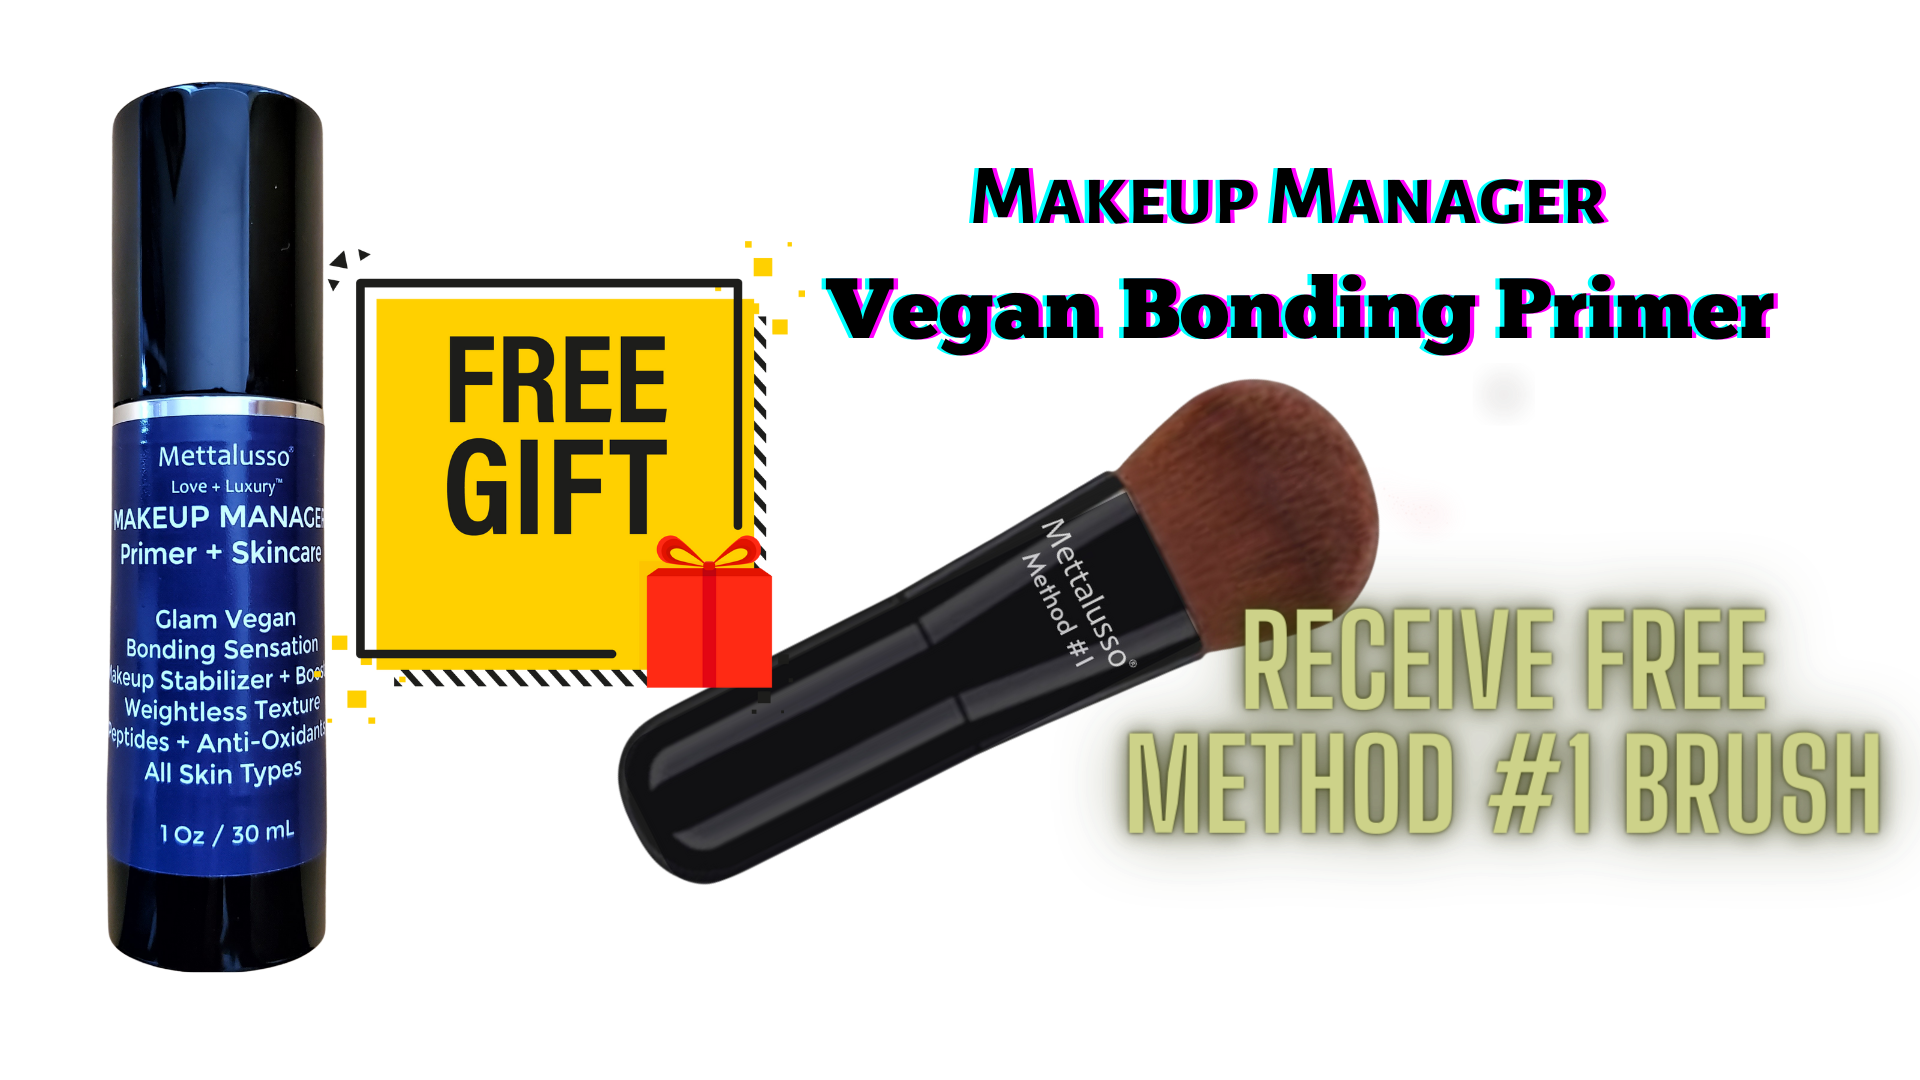 Mettalusso giveaway with free gift of method #1 makeup brush with each purchase of Makeup Manager Vegan Bonding Primer